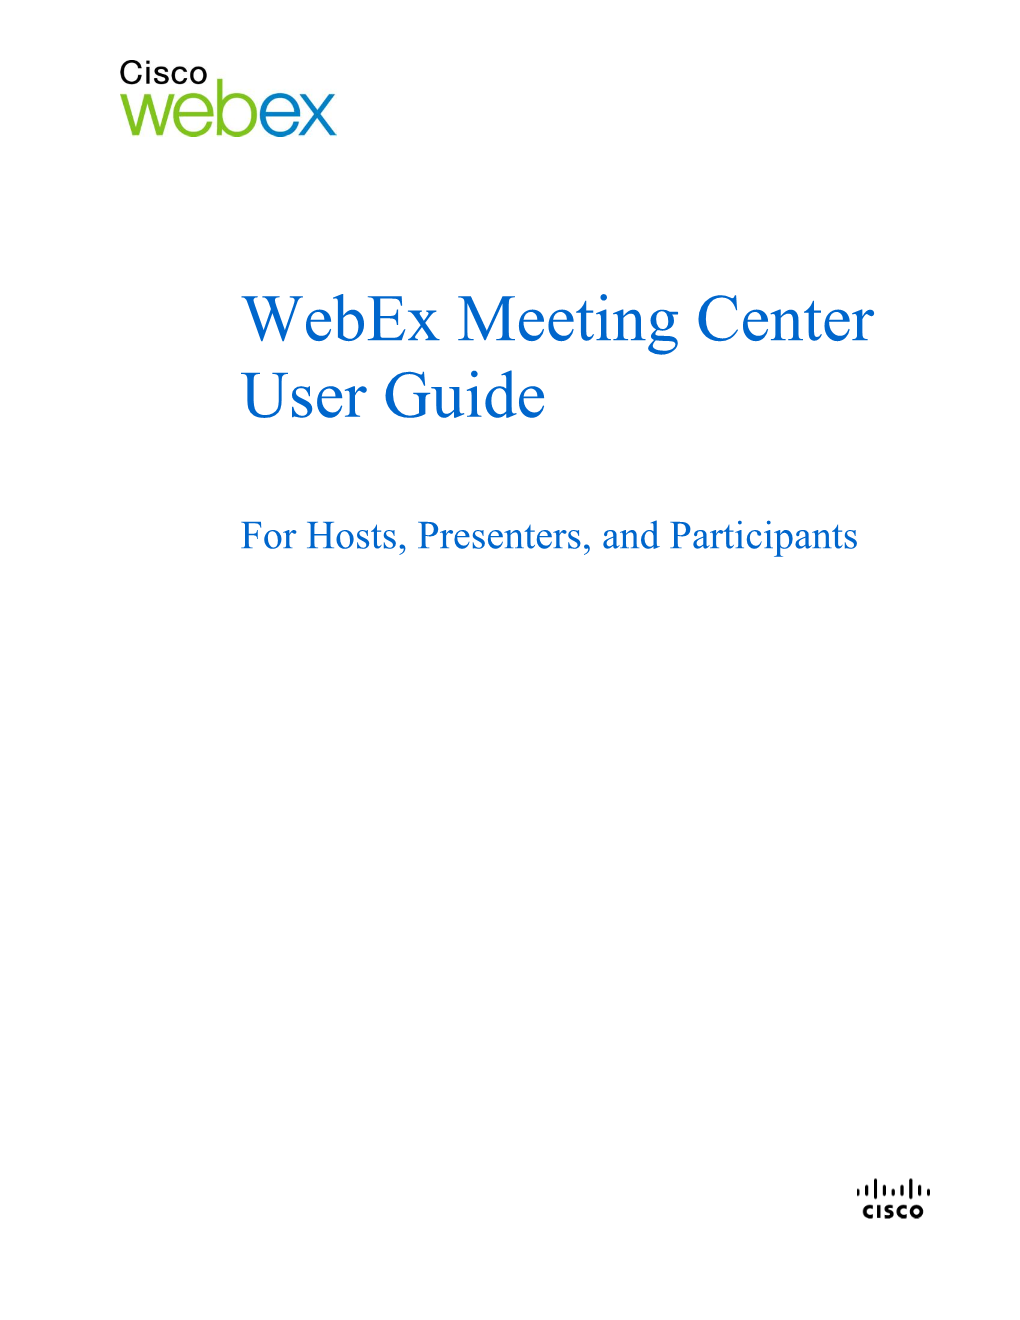 Cisco Webex Meeting Center User Guide (For Hosts, Presenters, And